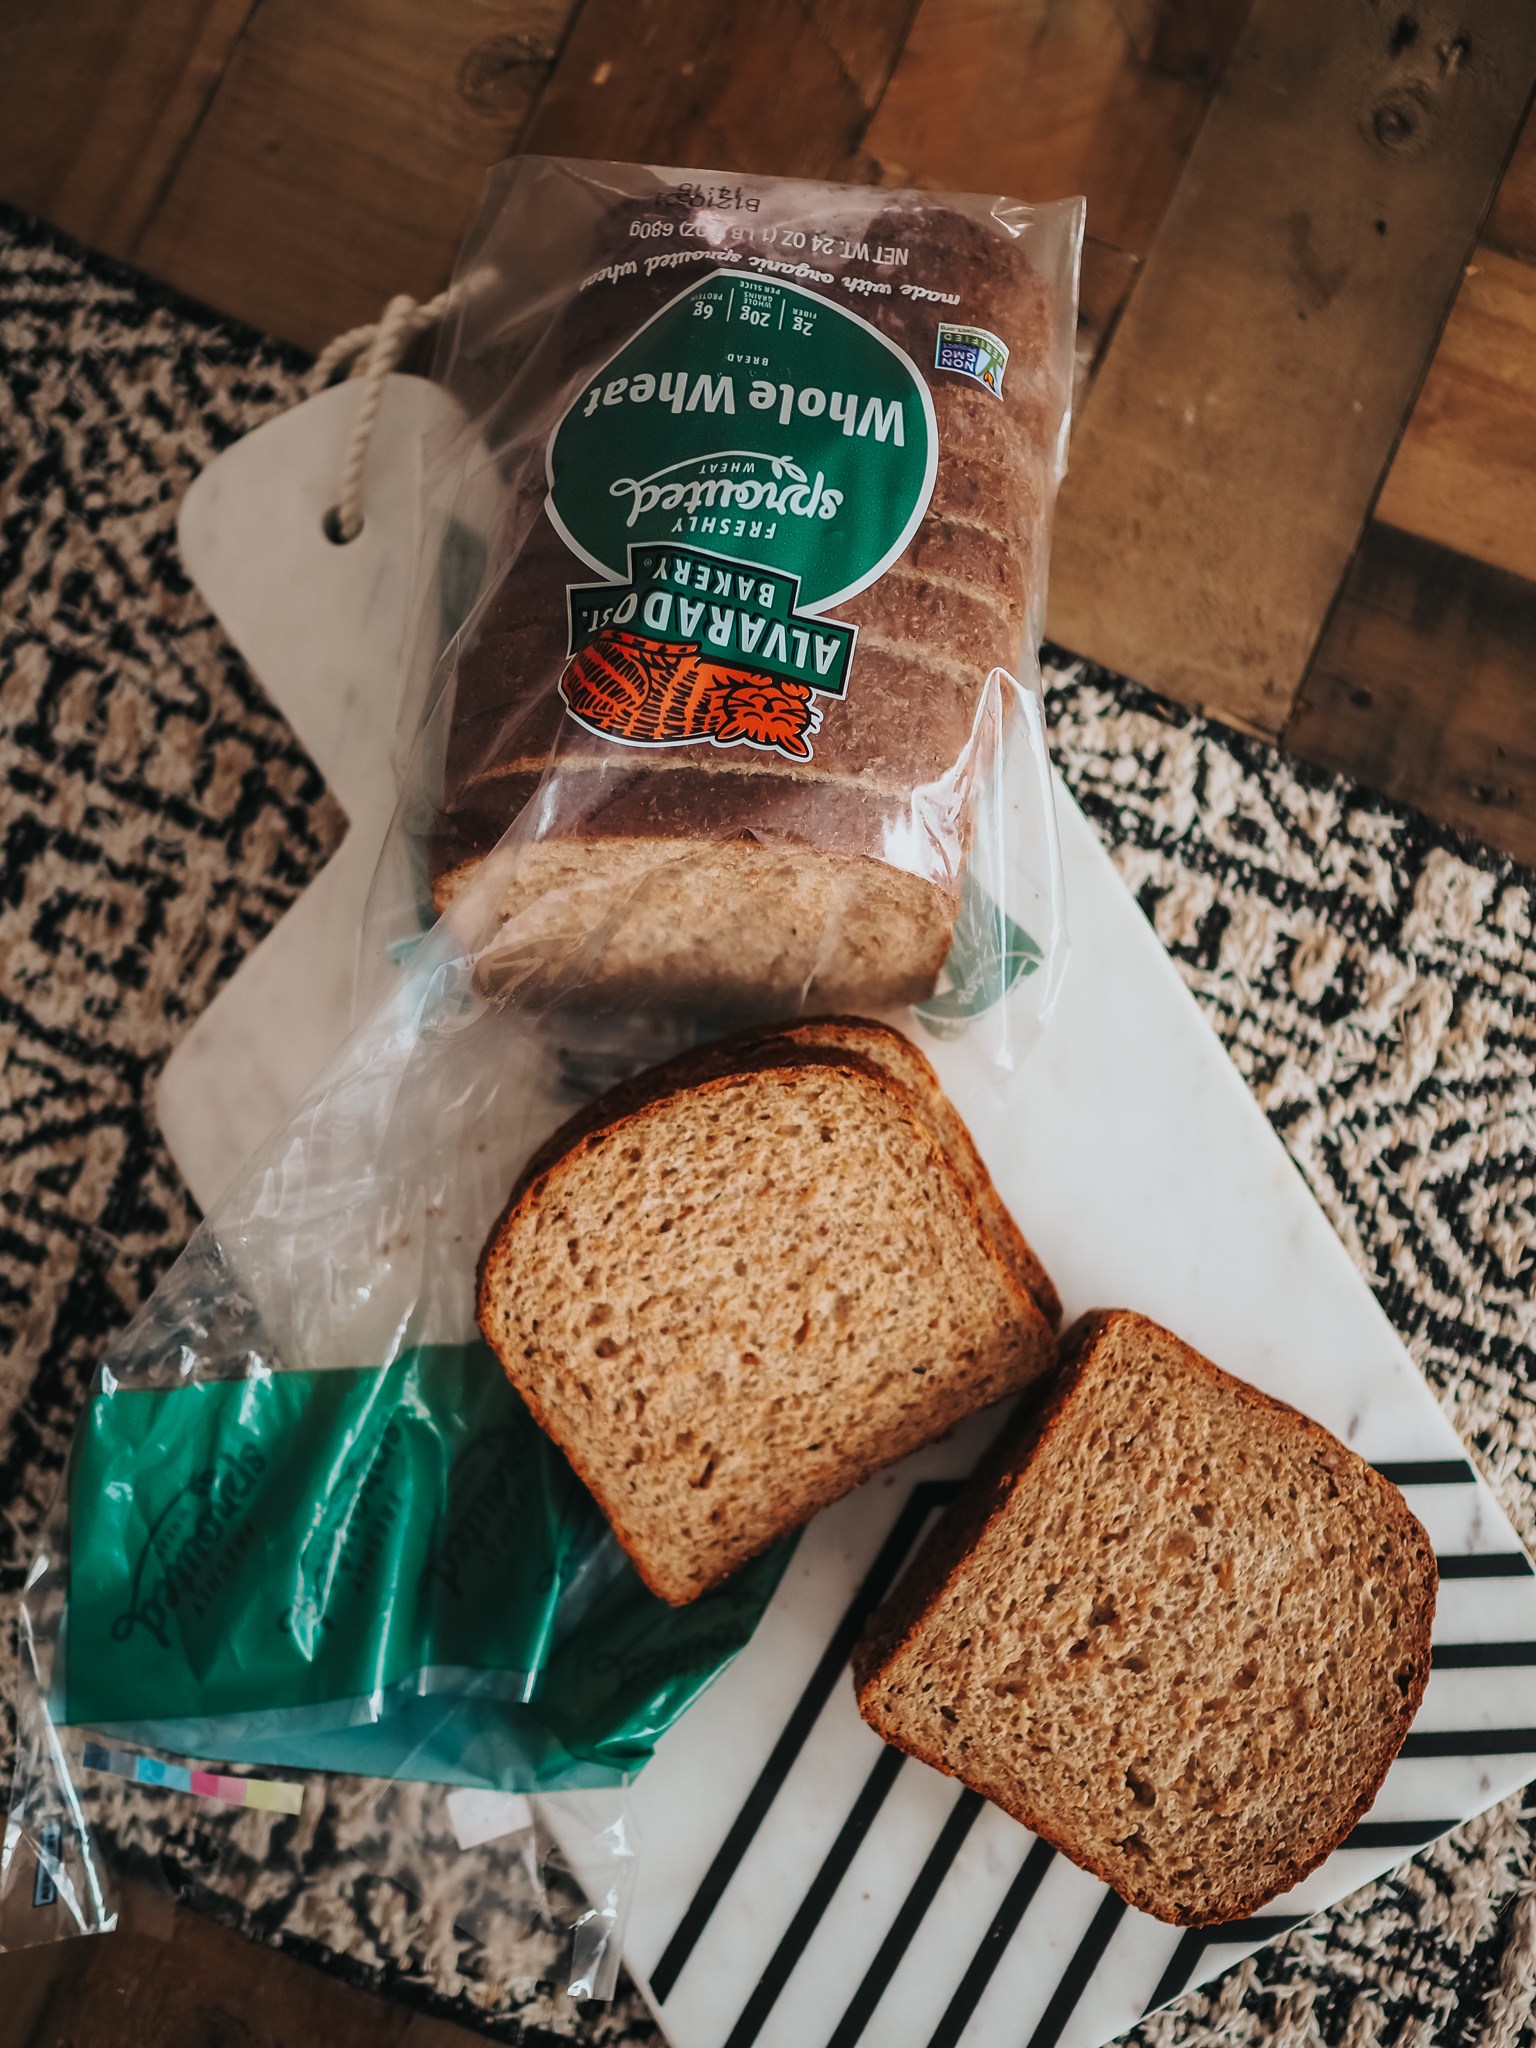 Don’t be fooled by misleading labels! This blog post covers the BEST vegan bread to buy (or make!). This vegan bread is healthy and delicious.